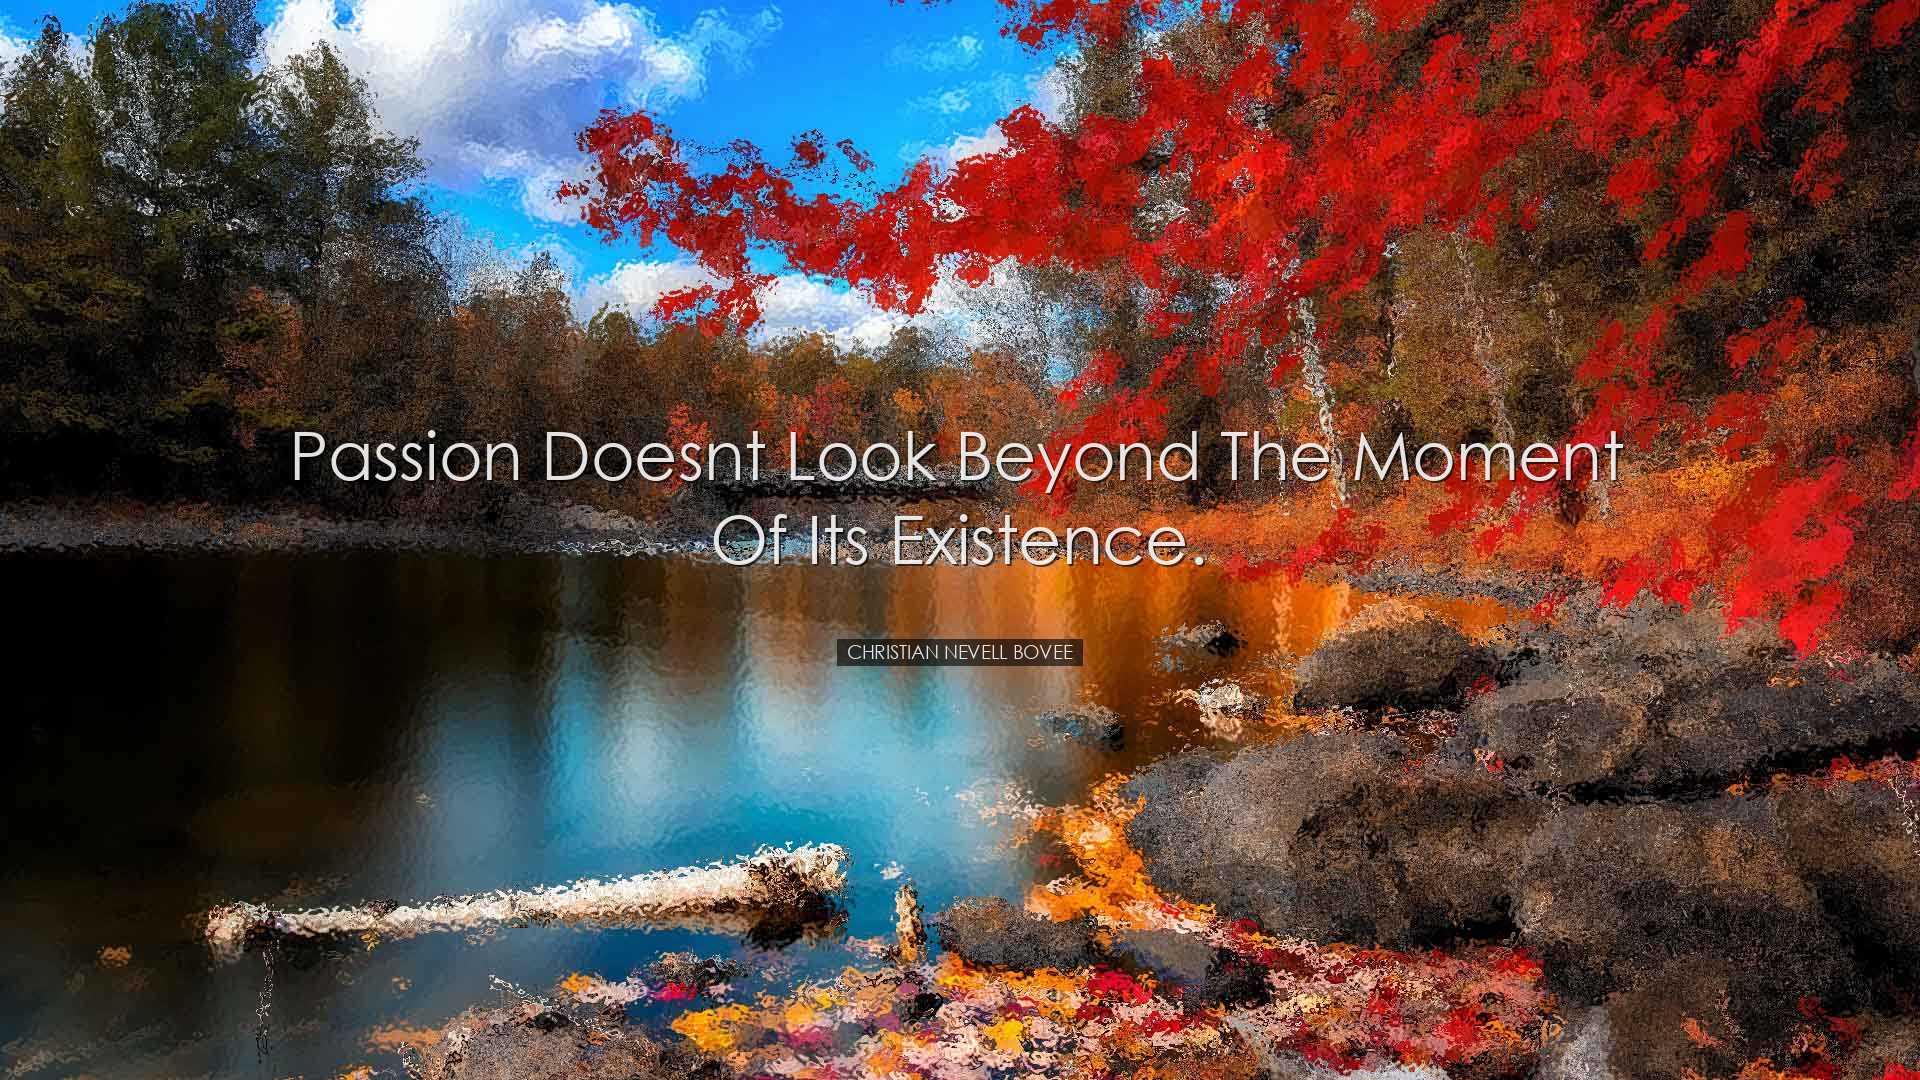 Passion doesnt look beyond the moment of its existence. - Christia